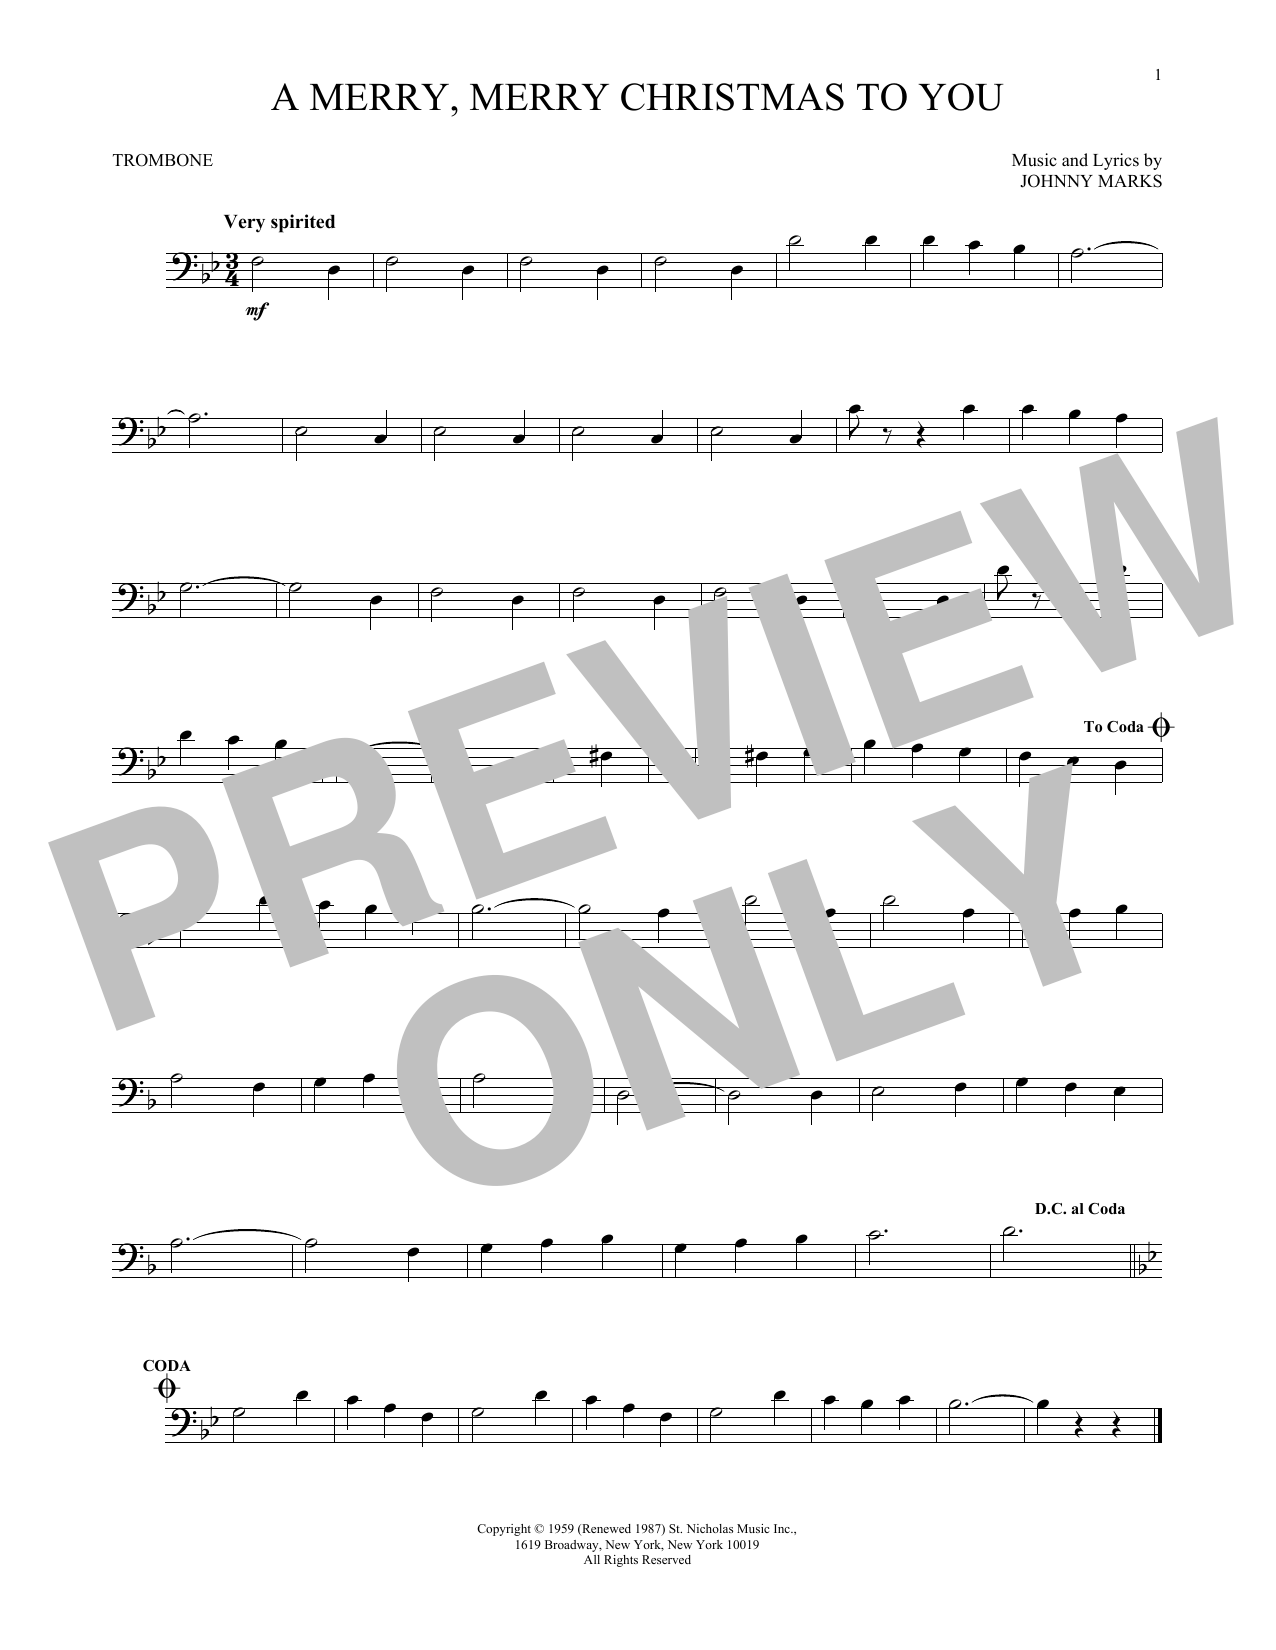 Download Johnny Marks A Merry, Merry Christmas To You Sheet Music